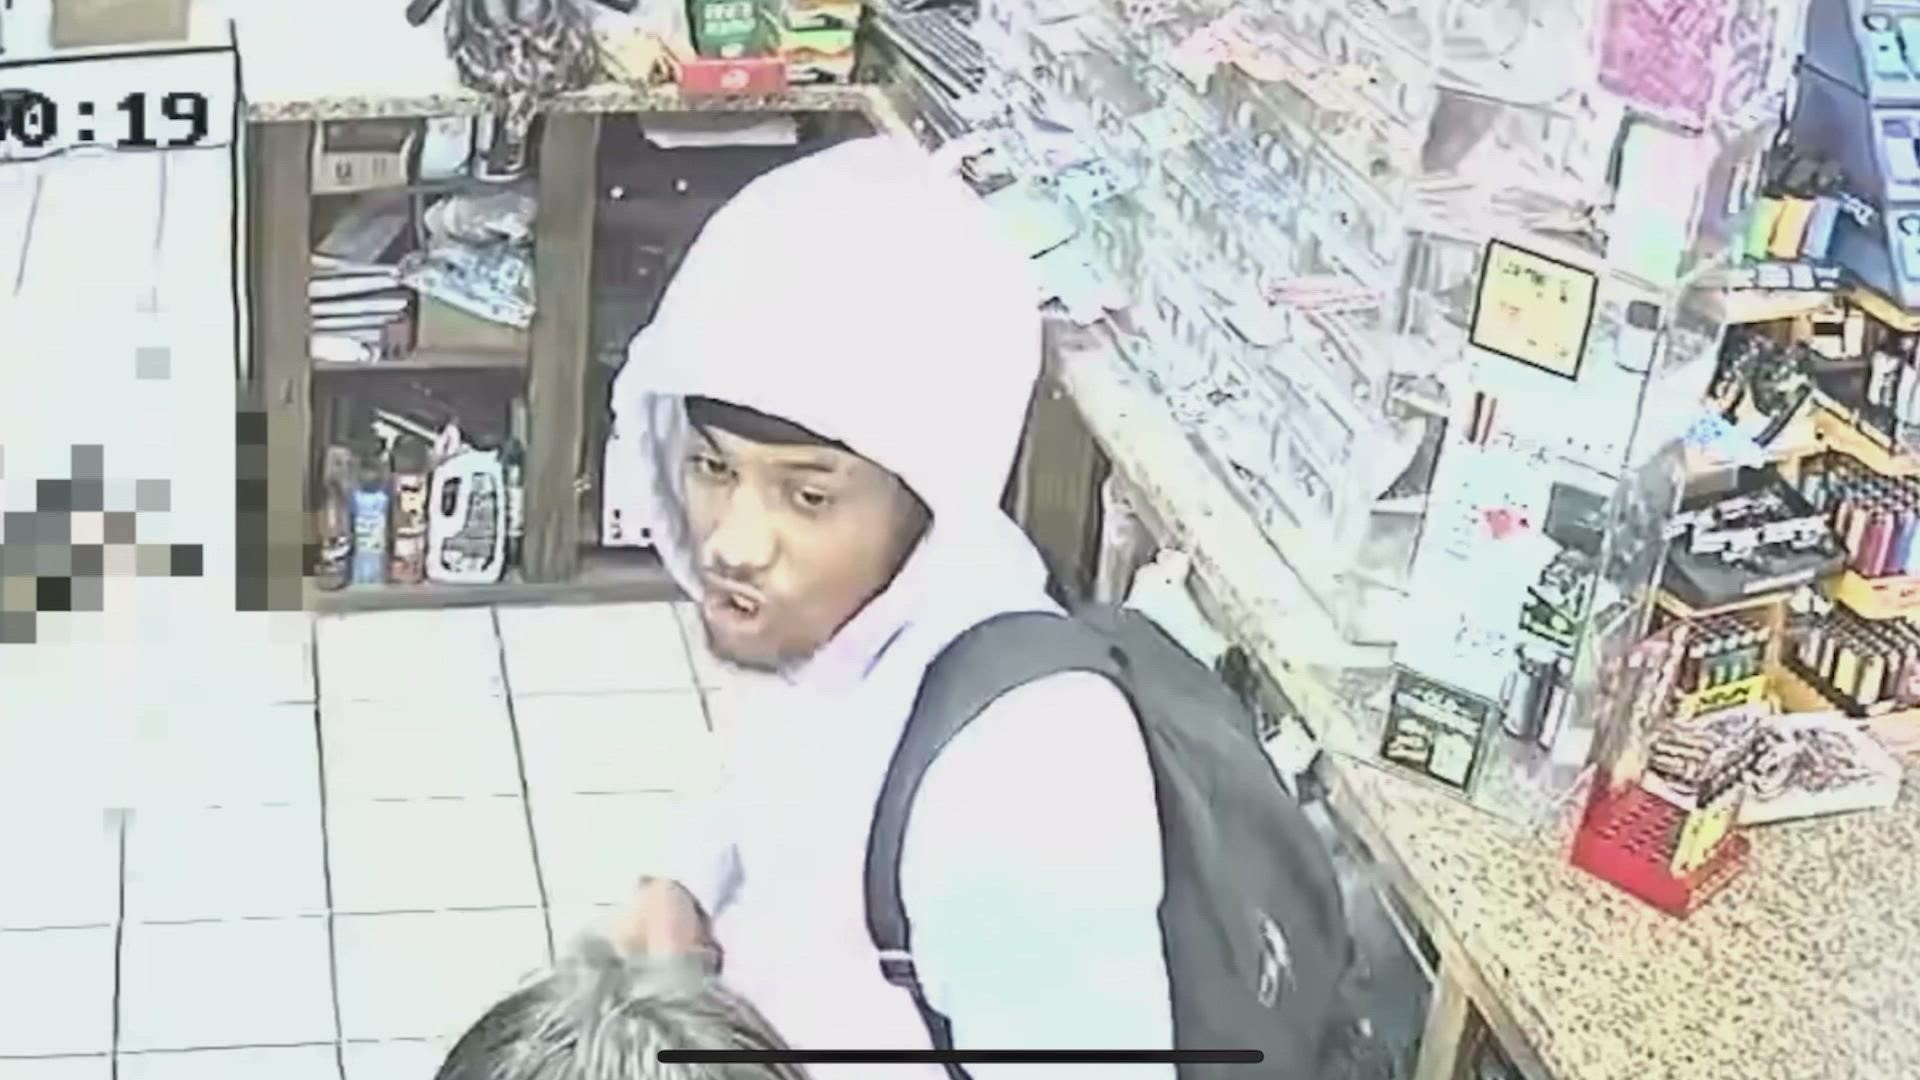 FWPD says surveillance video captured the moment the suspect began his attempt to get to the cash register and was confronted by the employee’s dog named Peanut.